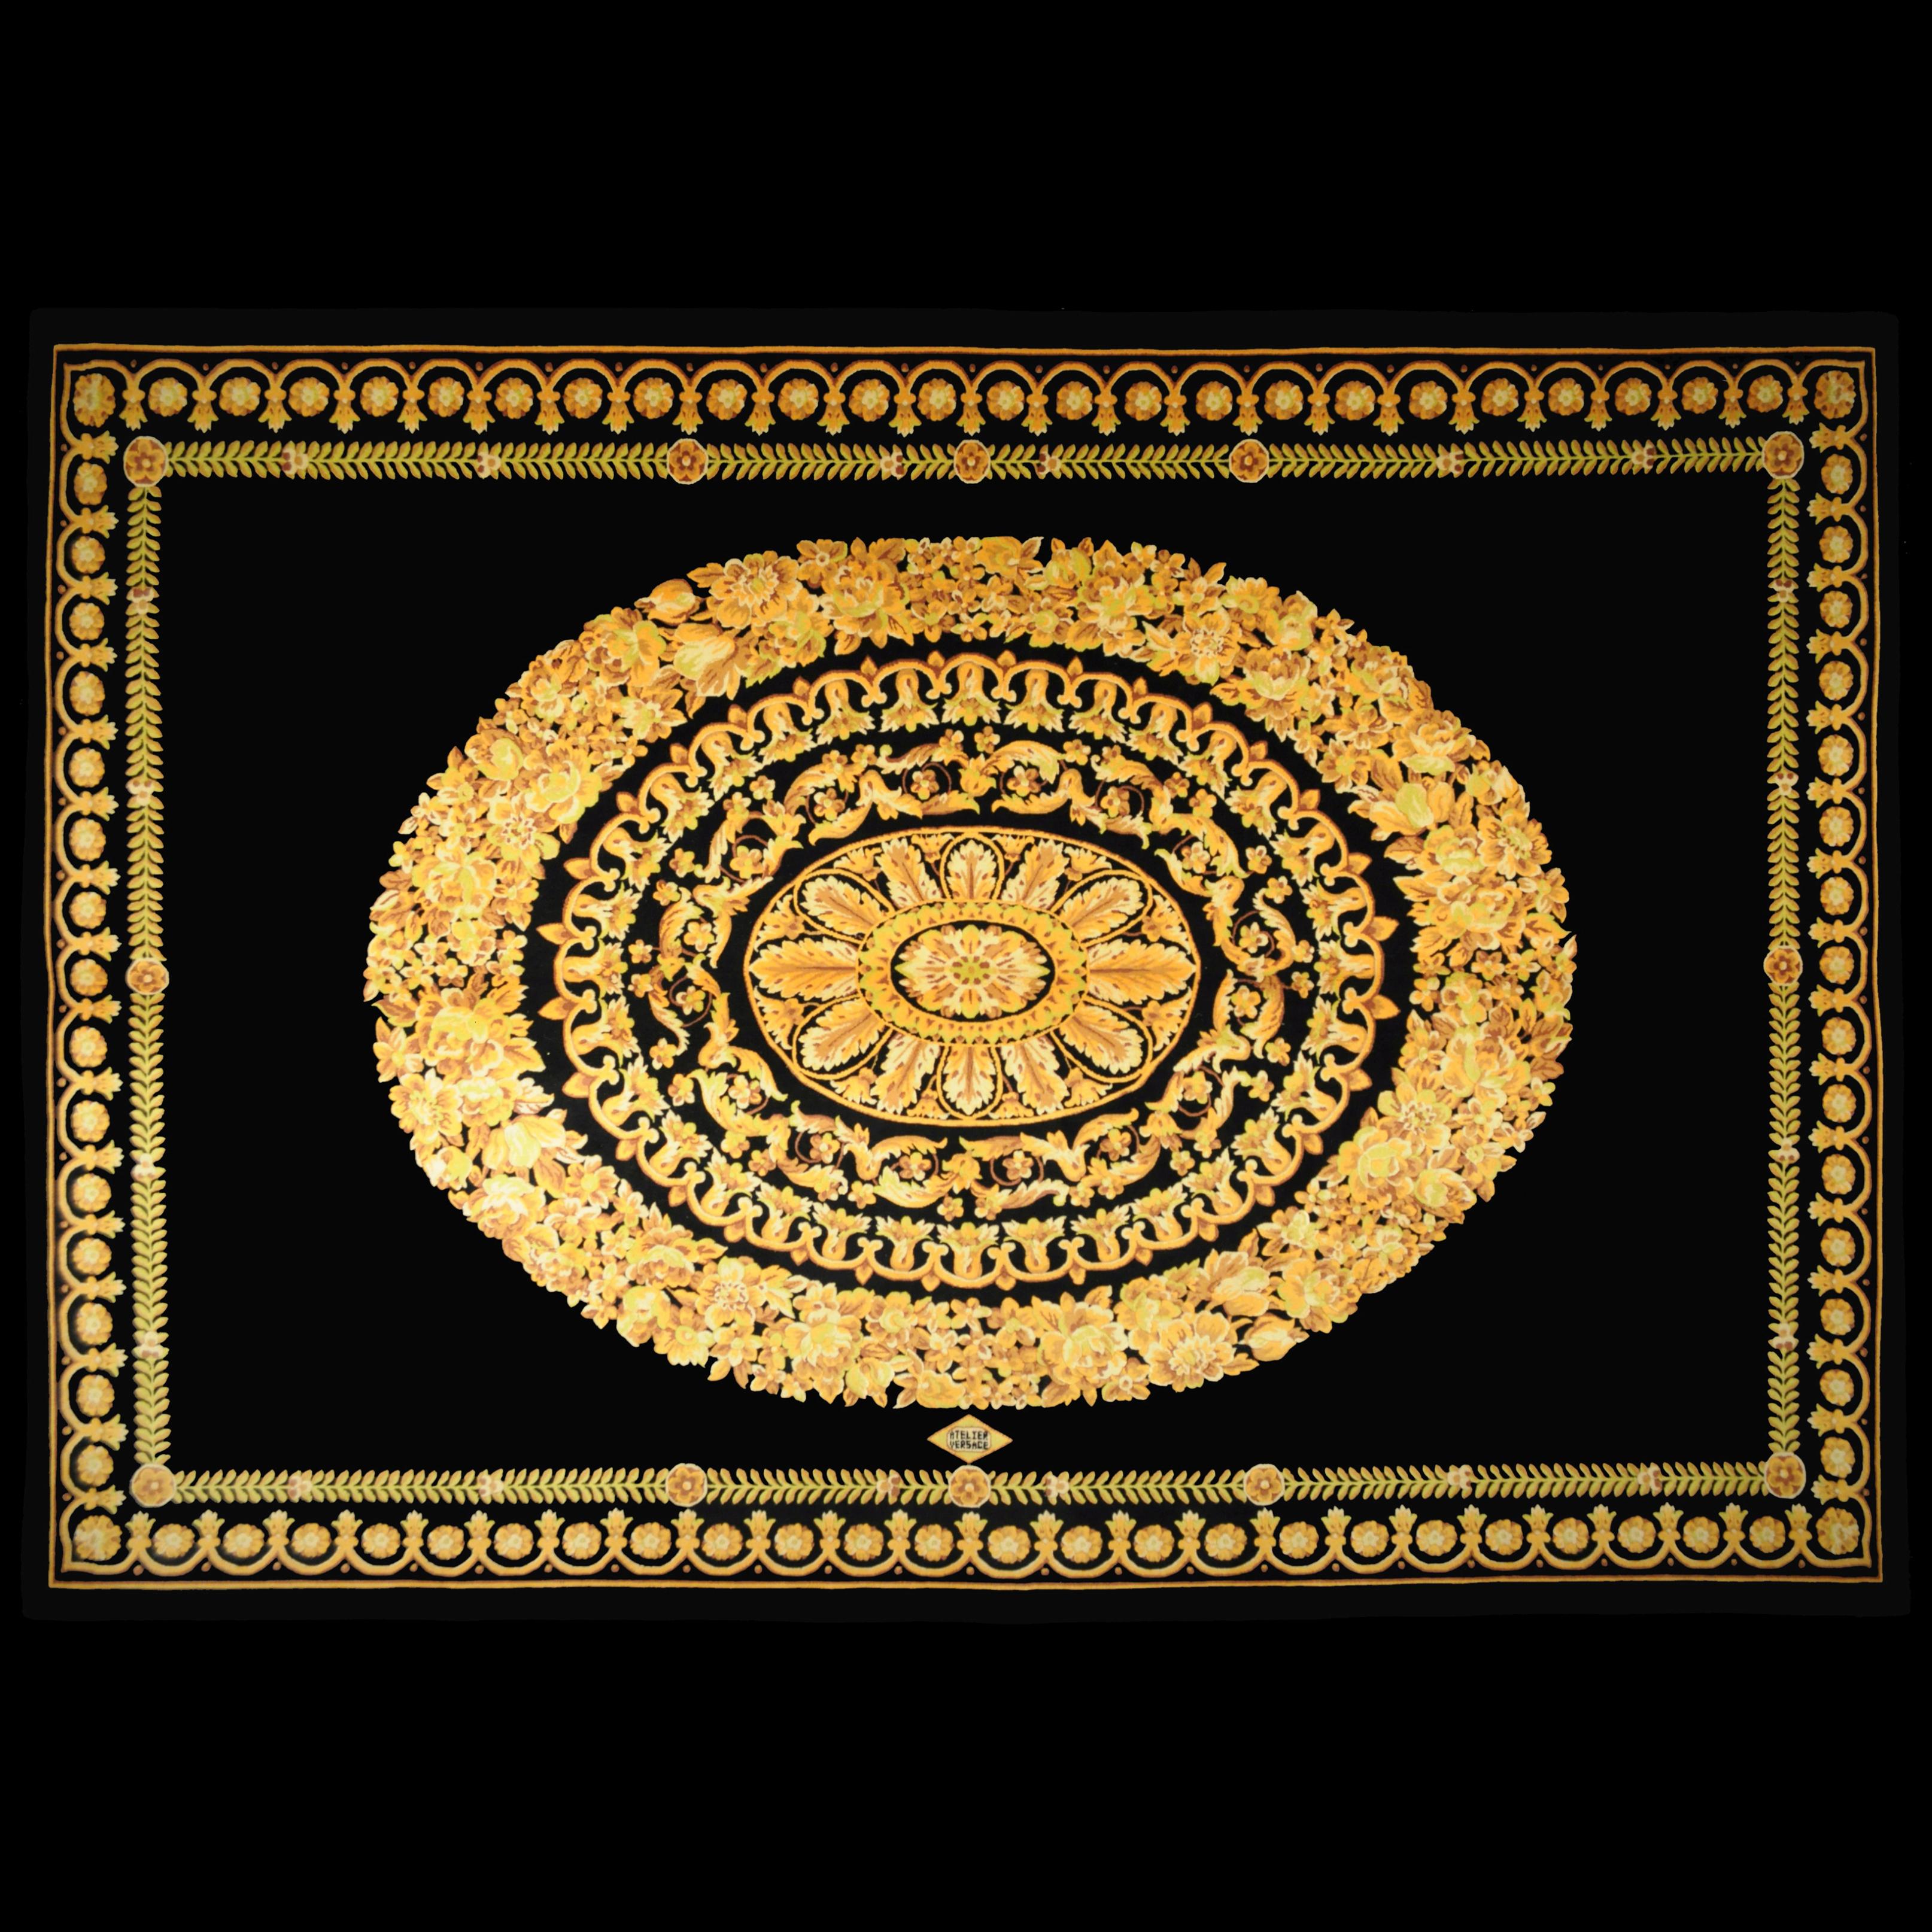 Rug made in China designed and manufactured by Atelier Versace

Petit Barocco Nero 200 x 300 

In good original condition, with minor wear consistent with age and use

A vintage Gianni Versace home signature wool rug. Baroque gold